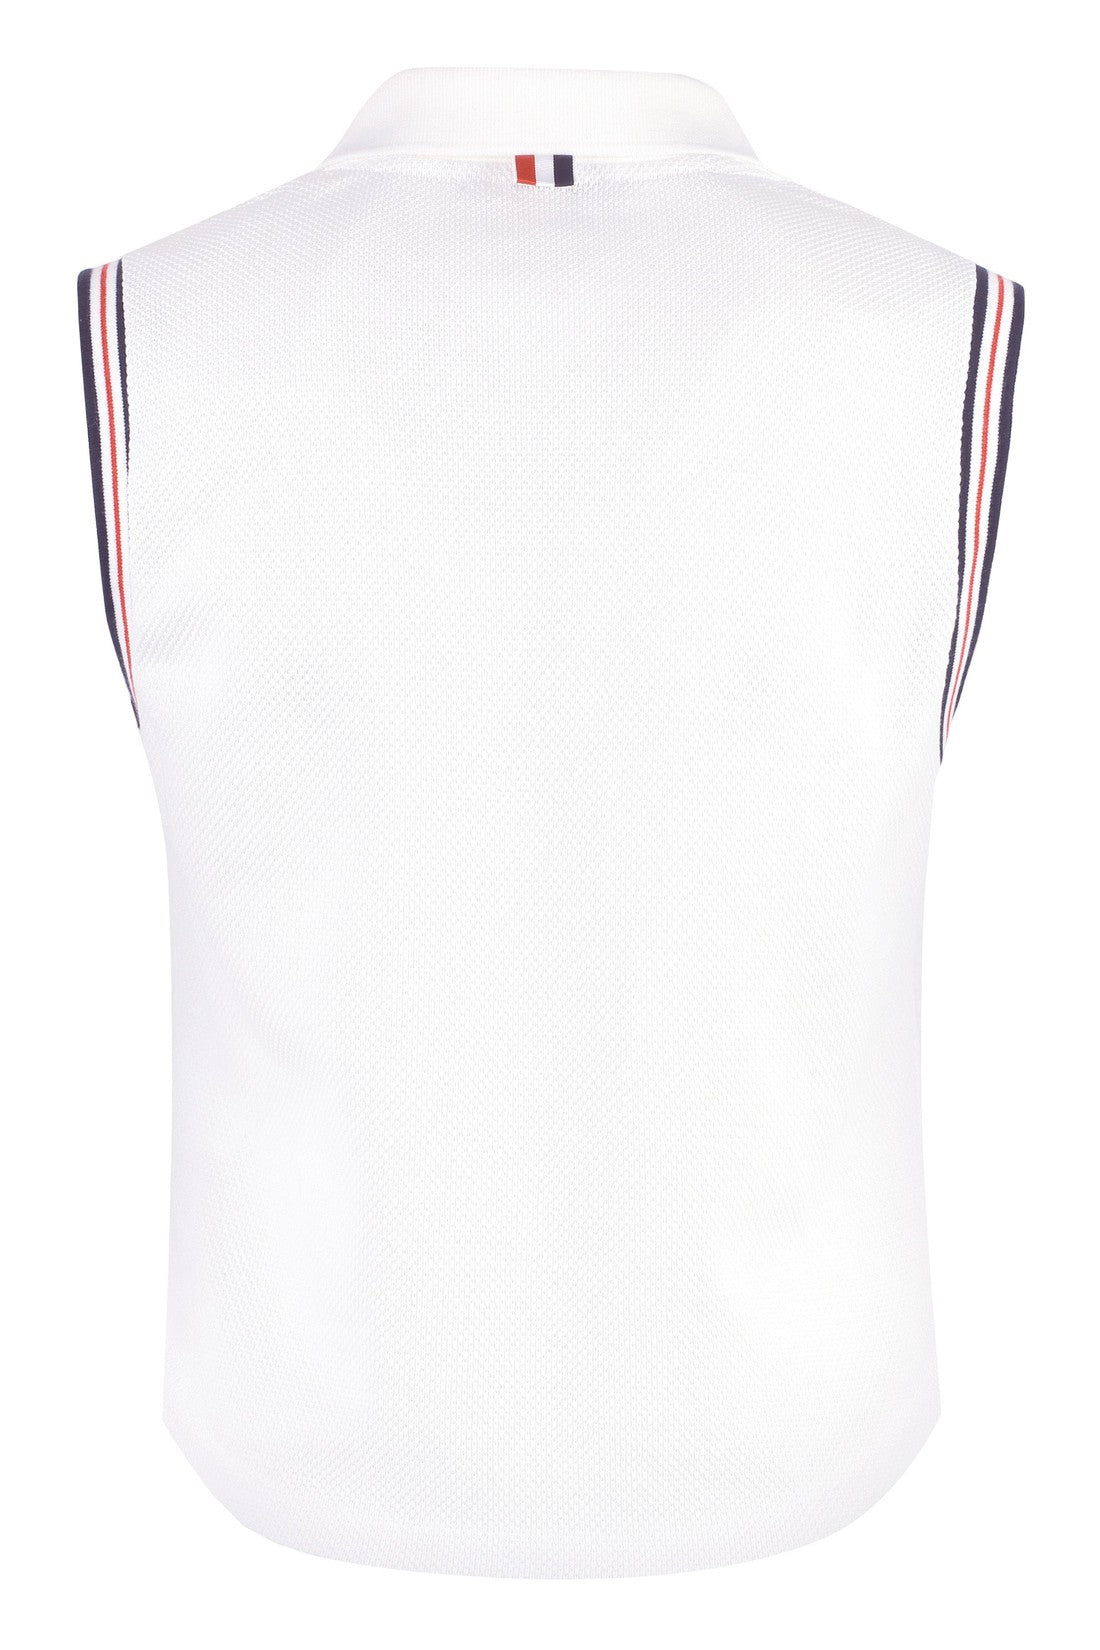 Thom Browne-OUTLET-SALE-Sleeveless polo shirt in cotton-ARCHIVIST